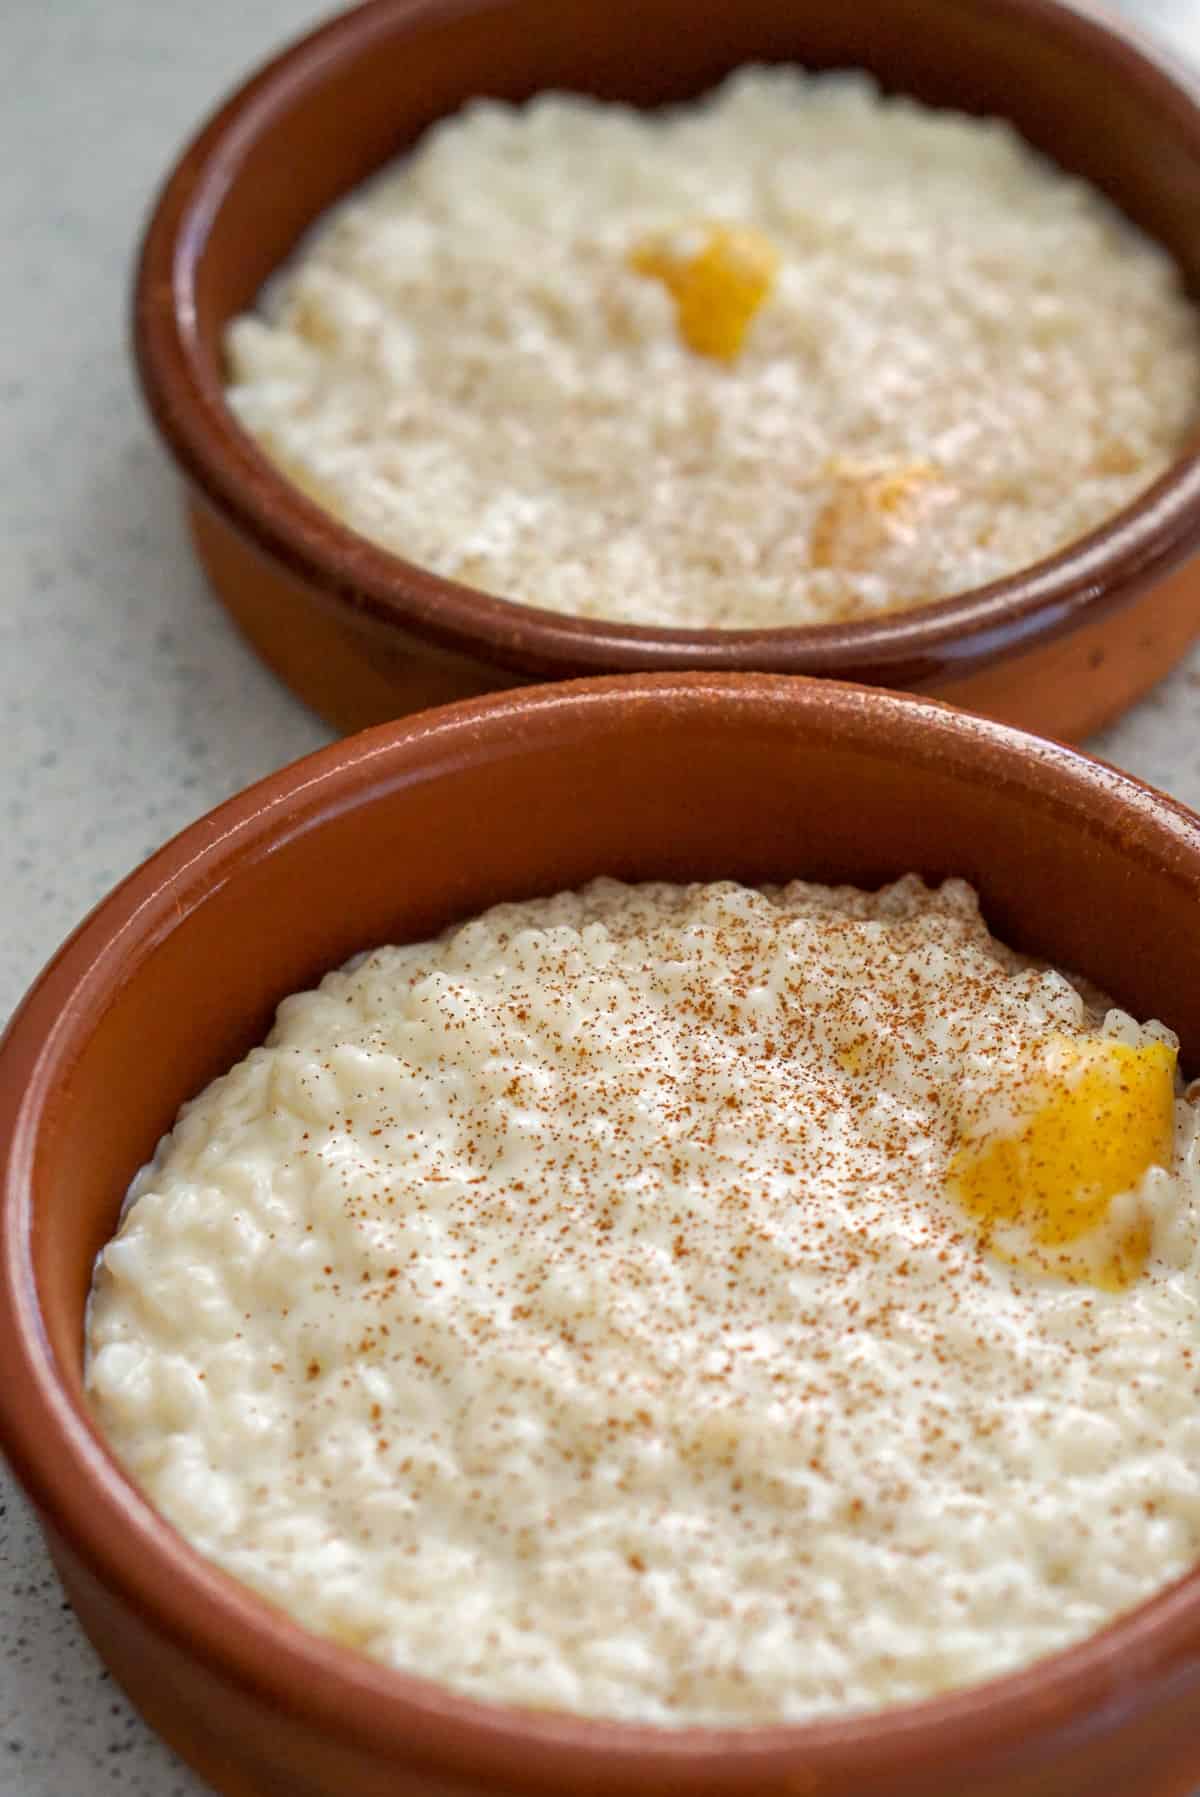 Two clay bowls of creamy Spanish rice pudding with cinnamon and lemon peel.